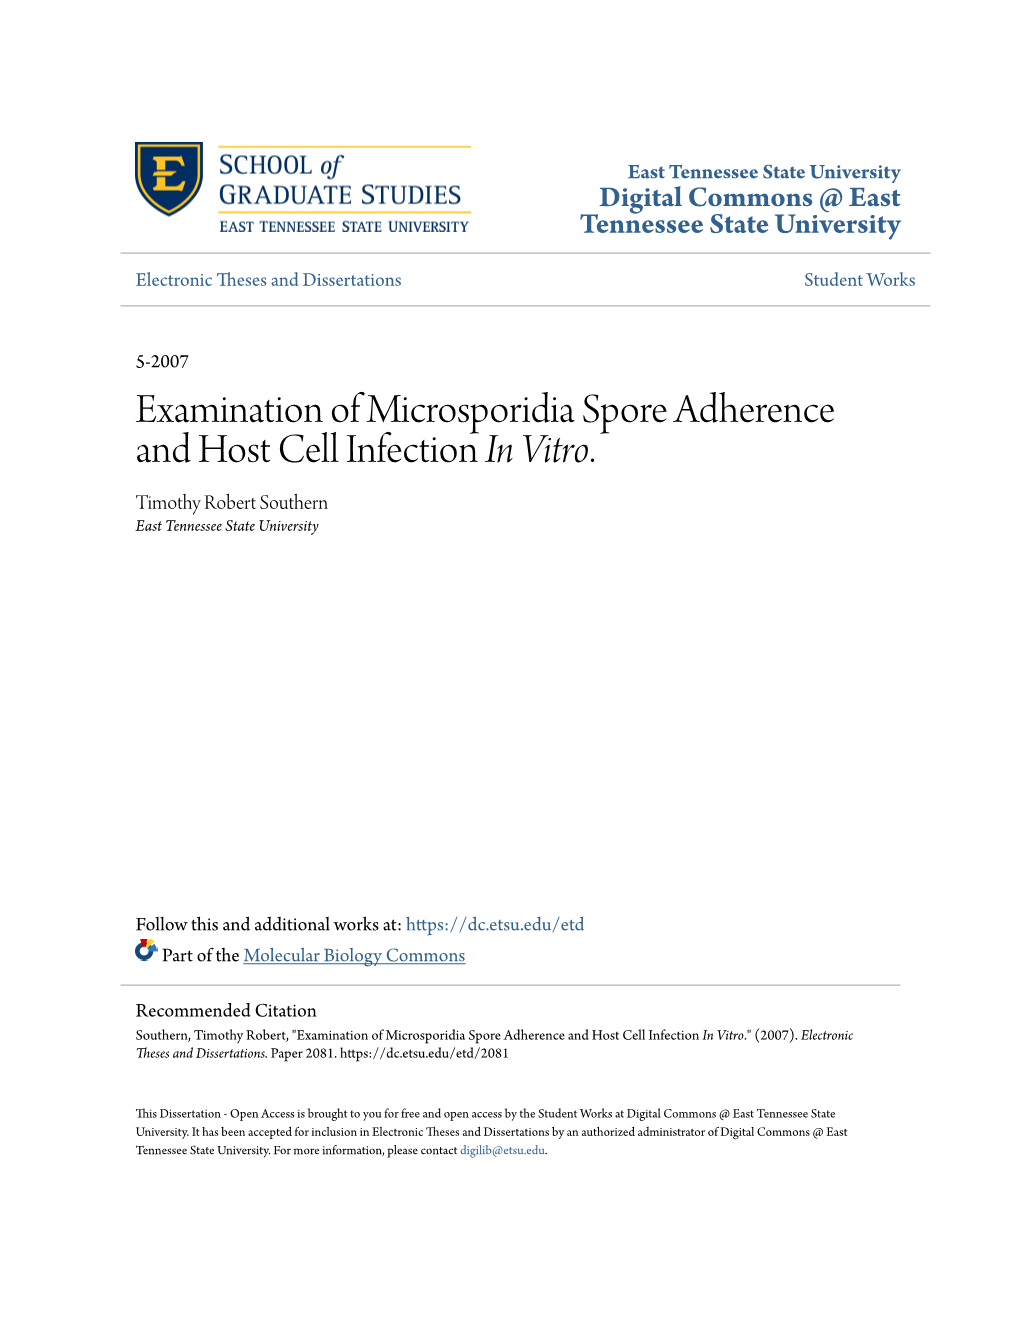 Examination of Microsporidia Spore Adherence and Host Cell Infection in Vitro